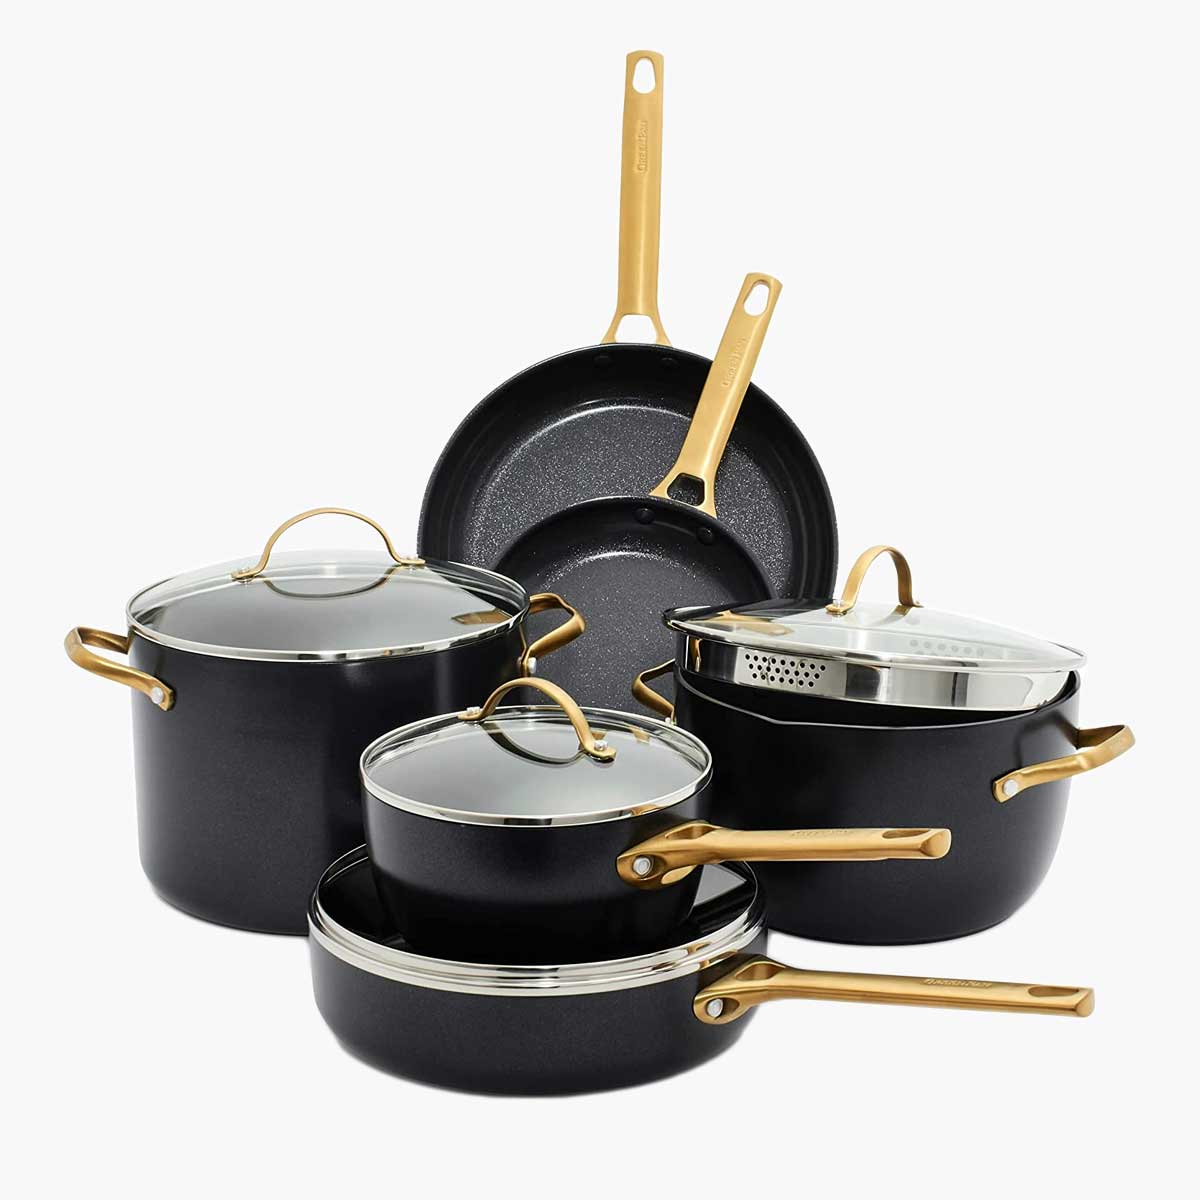 A set of Greenpan Reserve Cookware, one of Oprah's 12 favorite kitchen gifts for 2021.